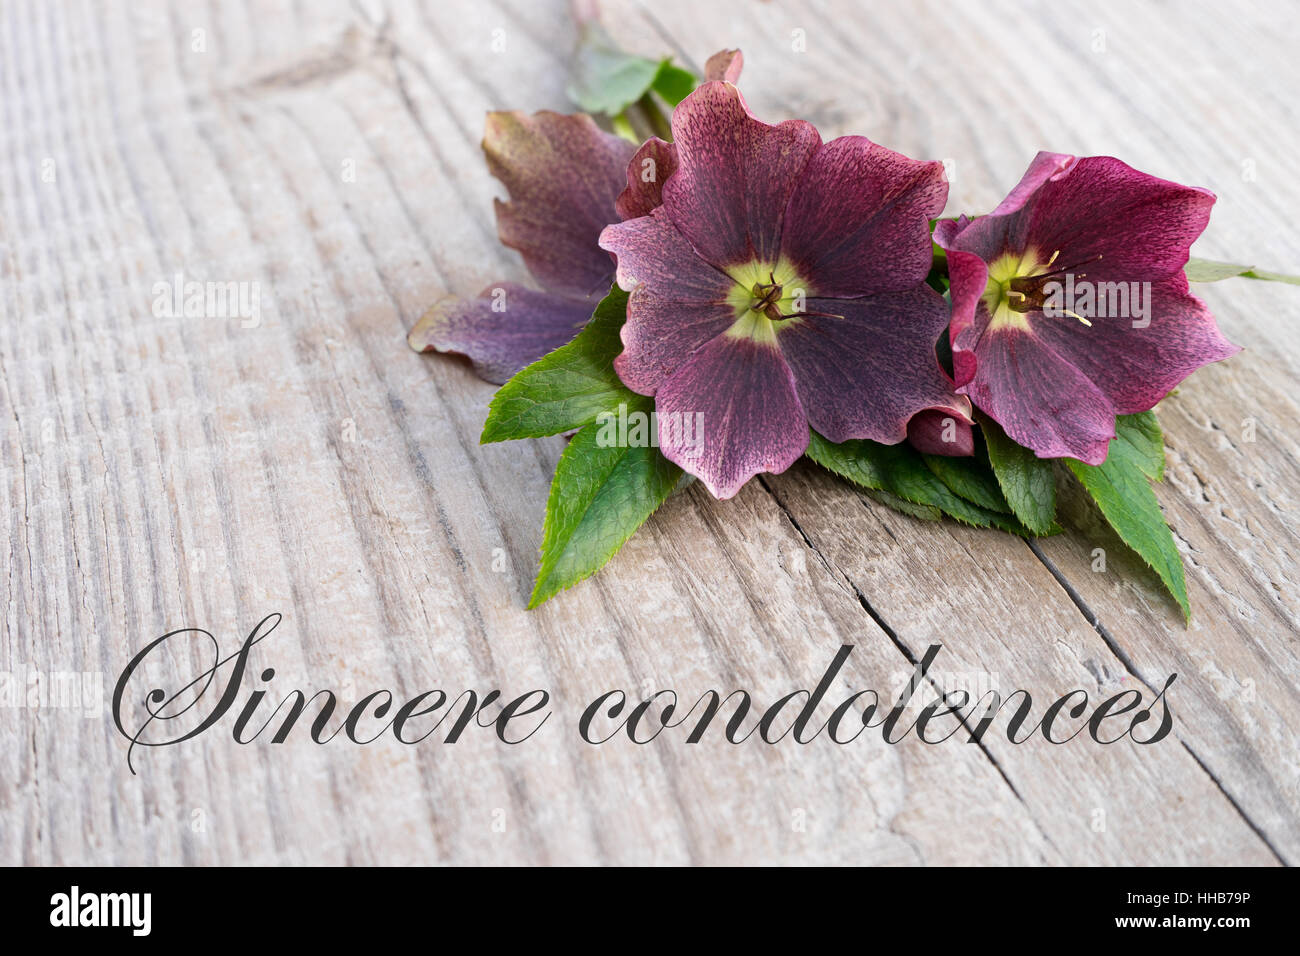 English Mourning card with purple hellebores Stock Photo